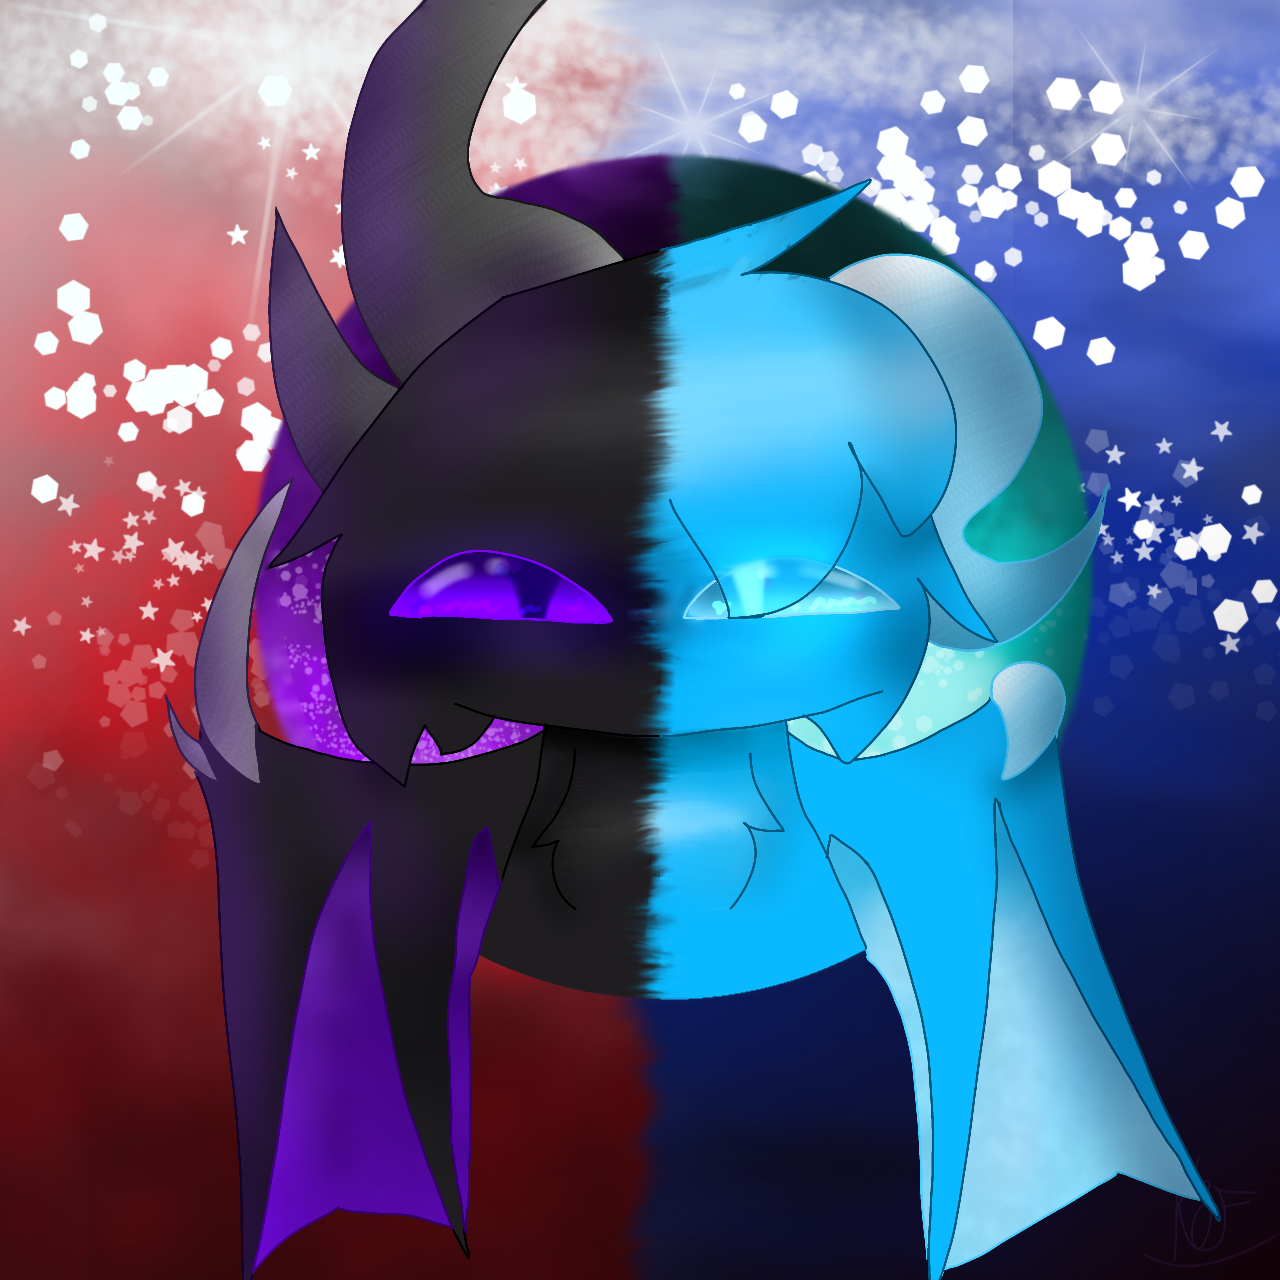 Glitch and shadow {doors} by KittyFl00f on DeviantArt